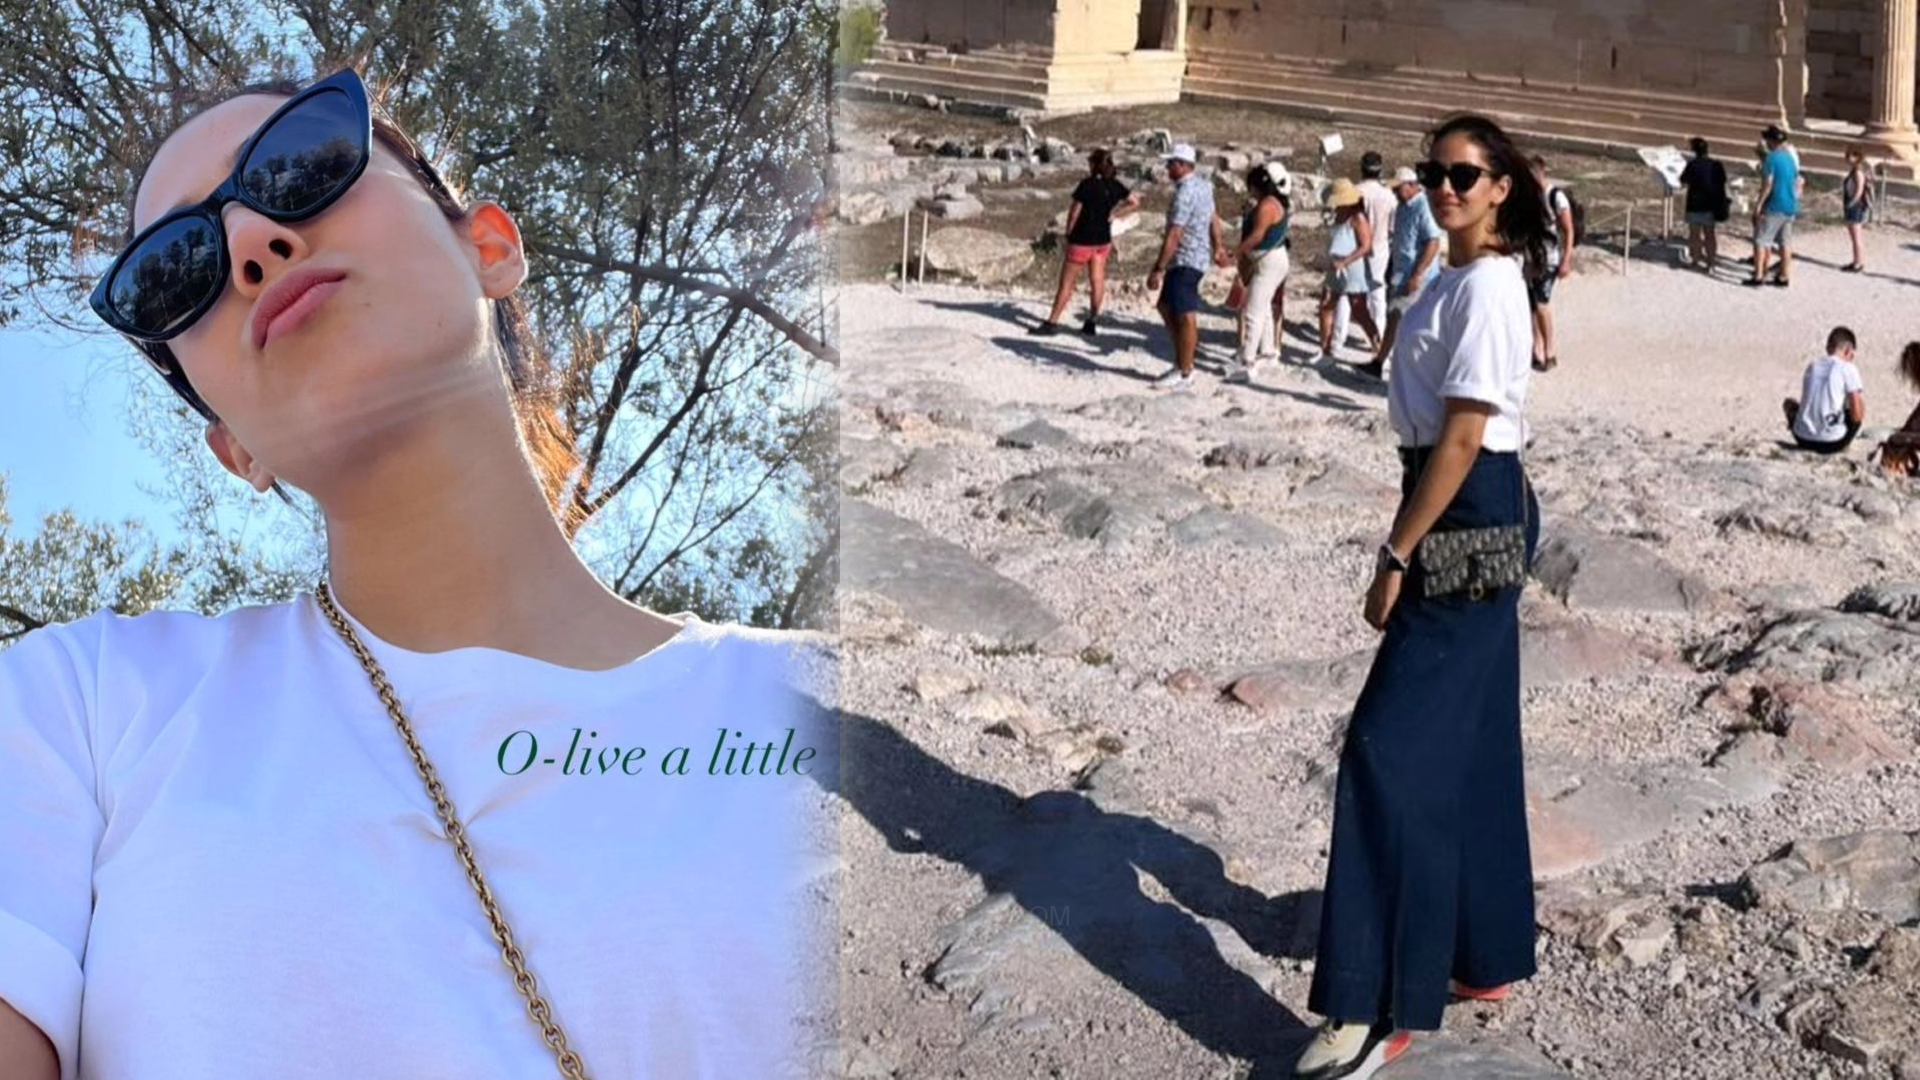 Yesterday, Mira Rajput shared a series of photos from her visit to the Erechtheion in Athens